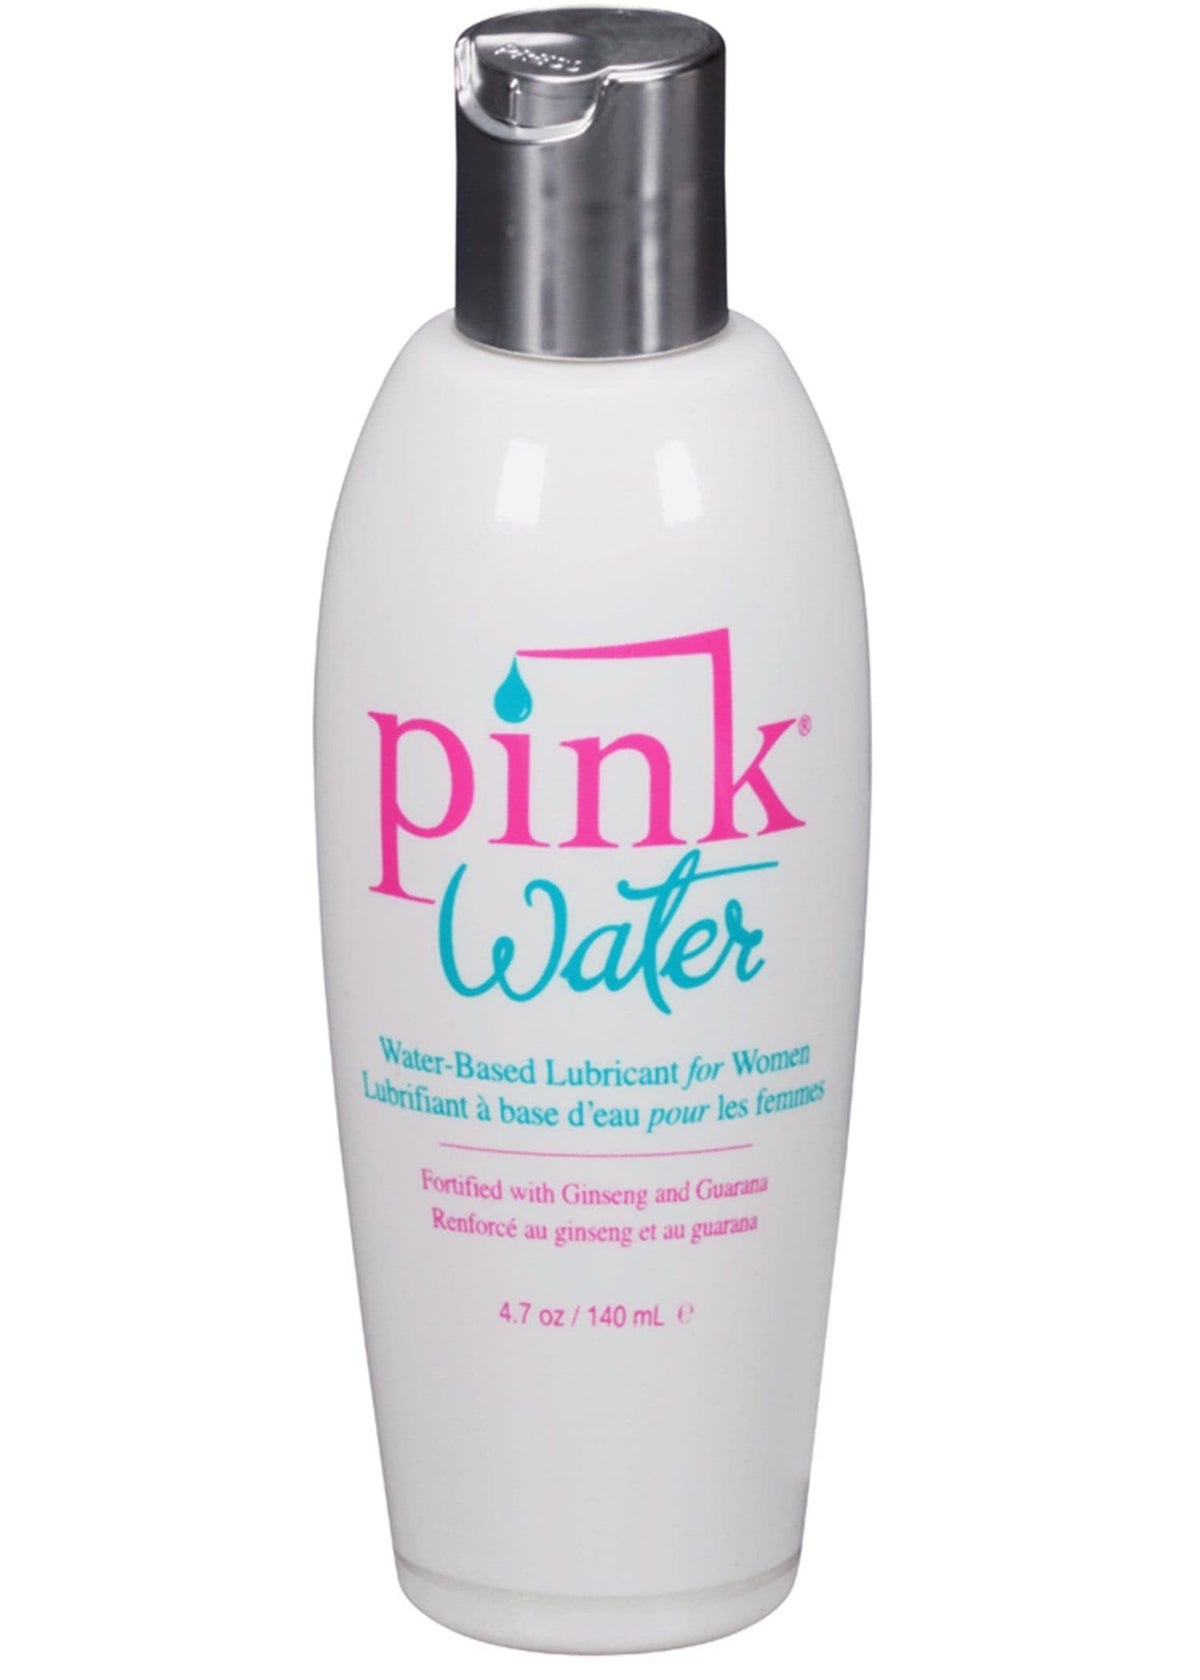 pink water based lubricant for women 4 7 oz 140 ml